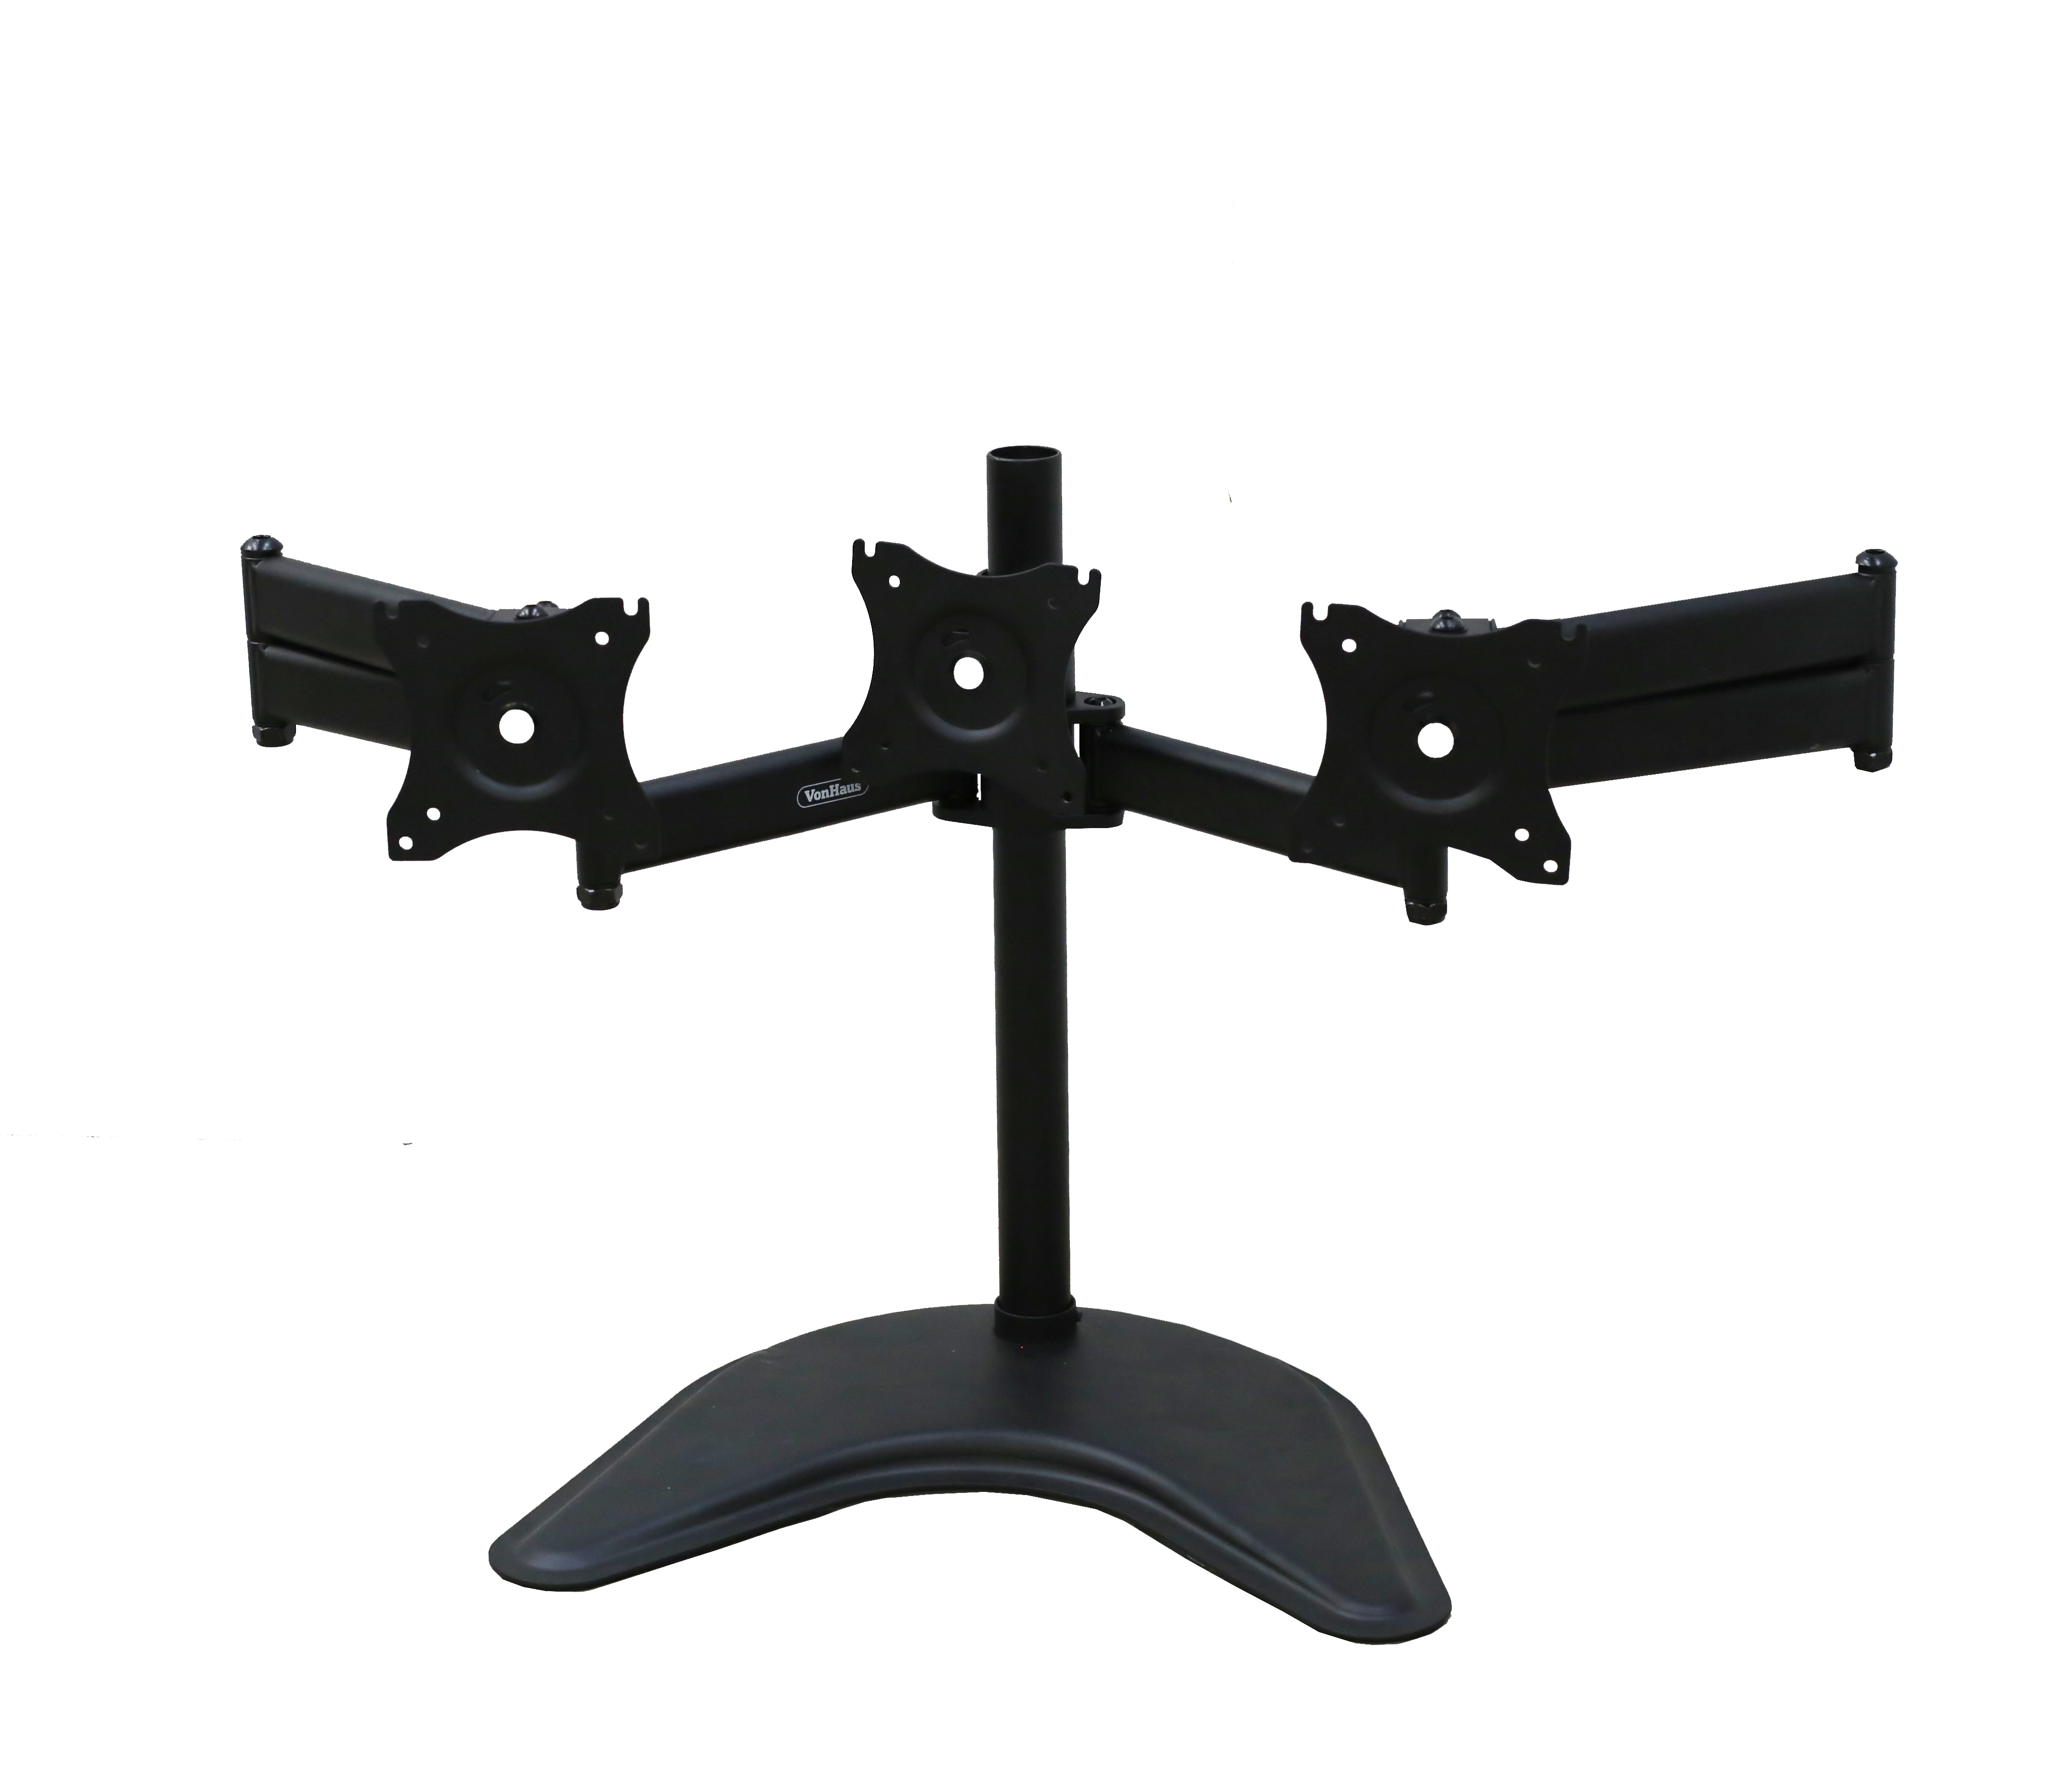 3 way Mulltidesk stand for 24″ Monitors